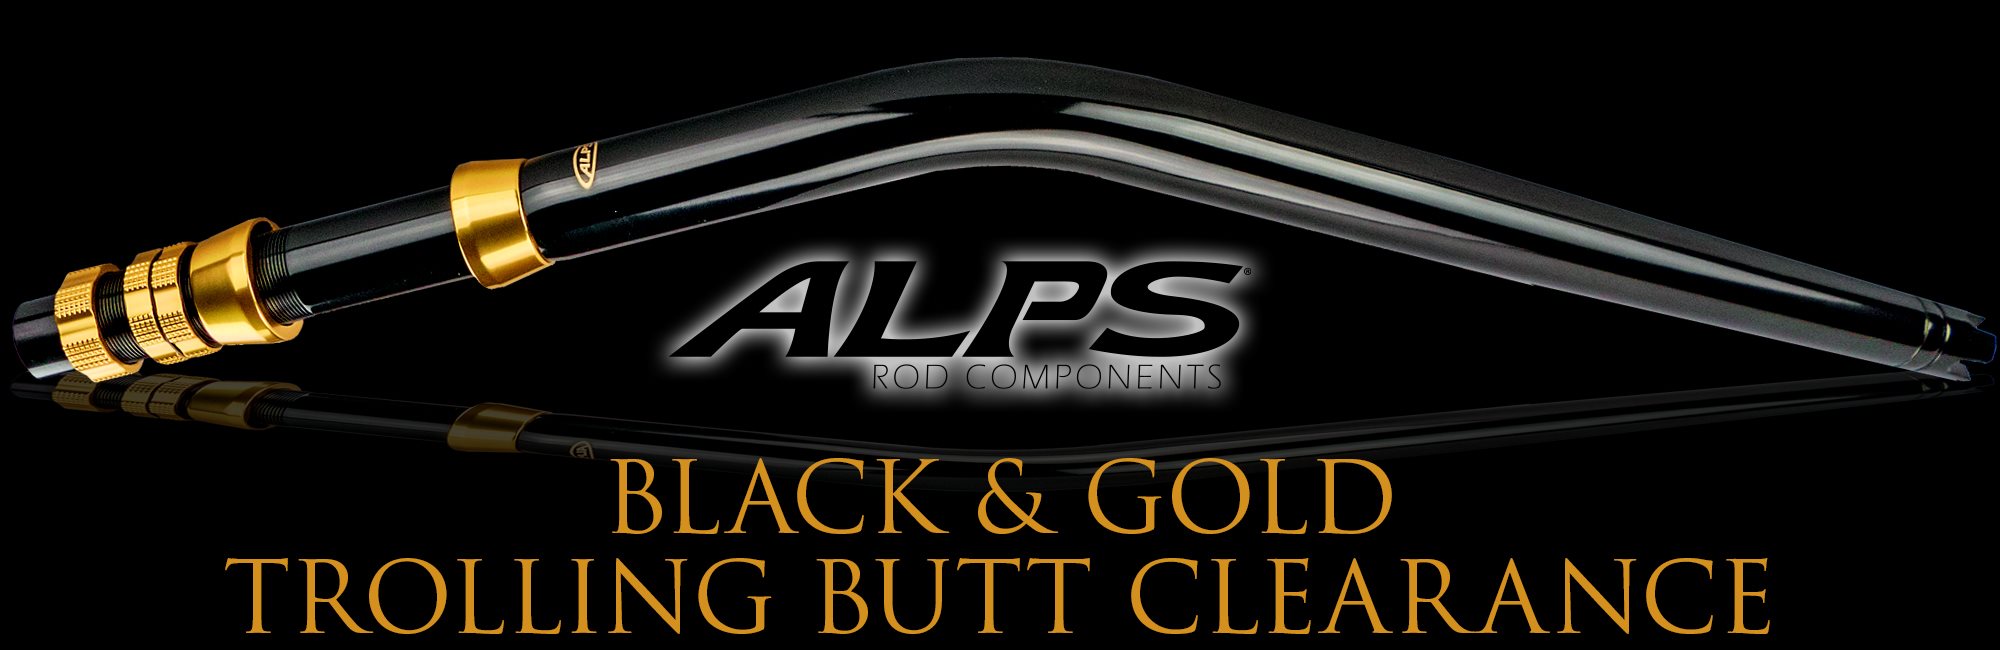 Black and Gold Trolling Butt Clearance